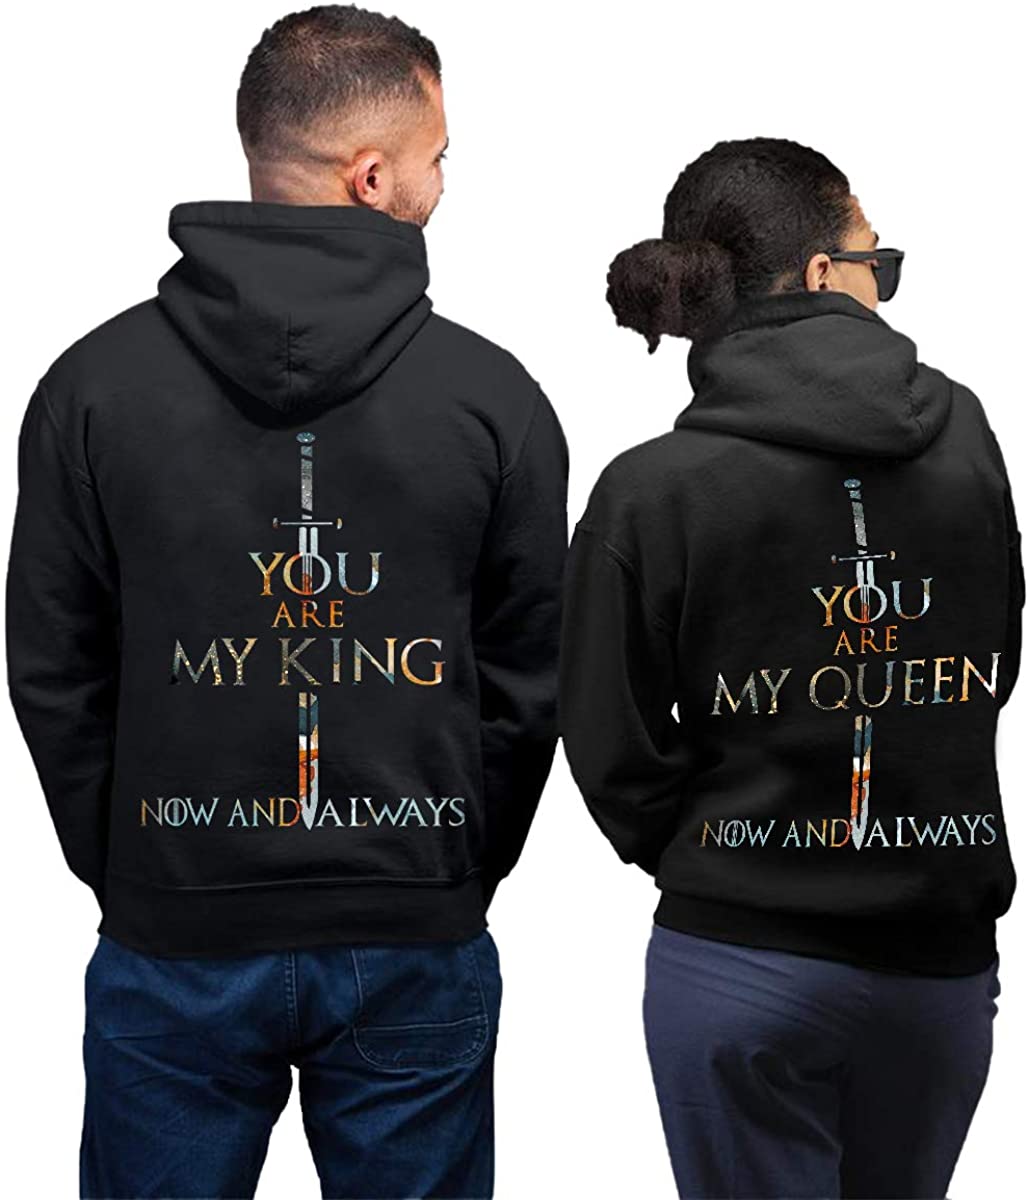 Gamer Couple Piercing Sword You are My King My Queen Hoodies Gift For Couple Lover Matching